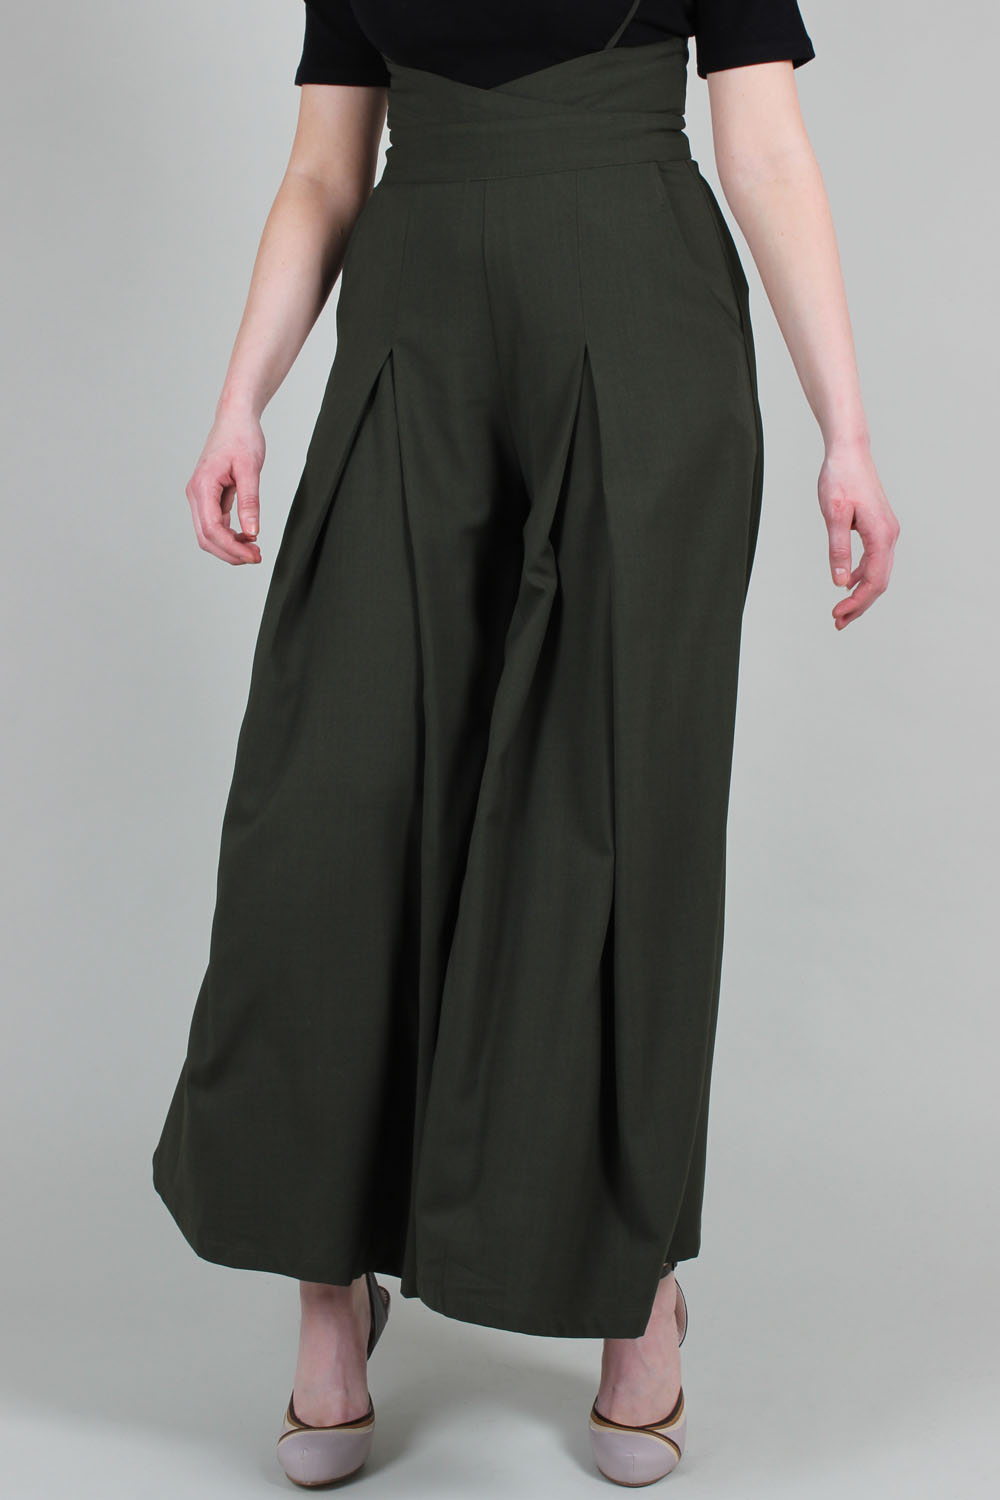 Kourt Olive High-Waisted Trousers With Suspenders